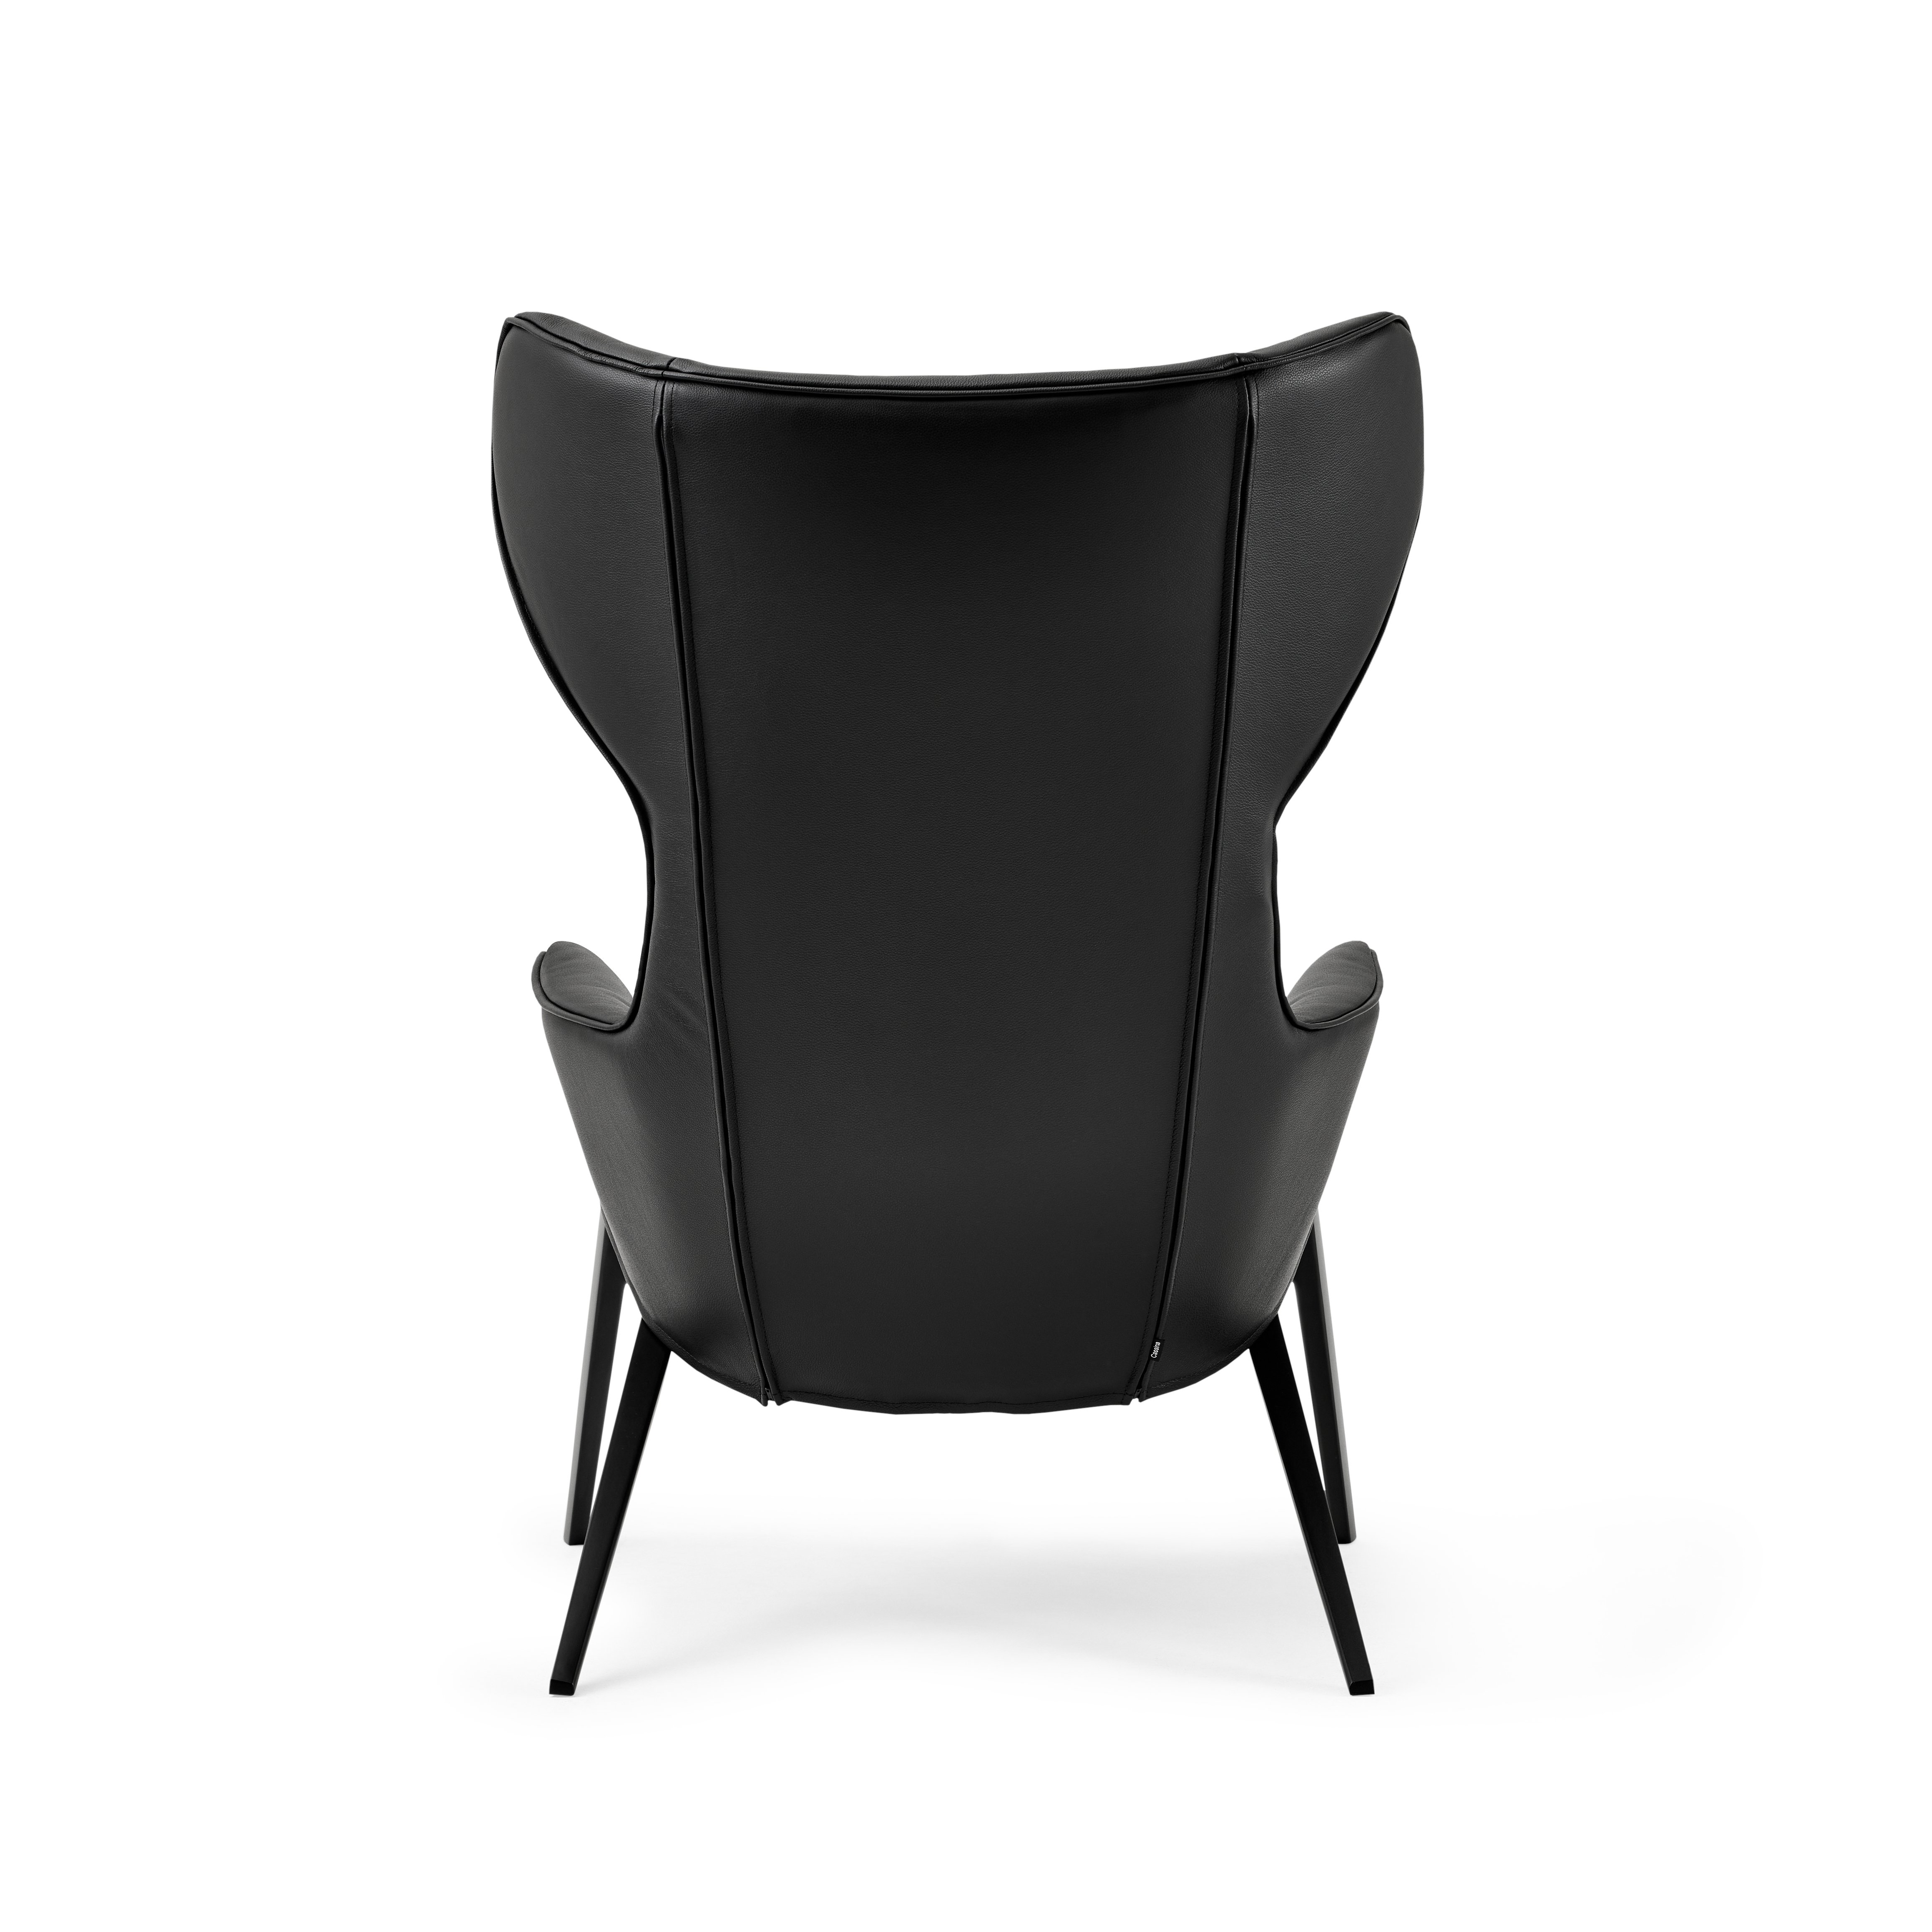 Detail back shot of the P22 lounge chair in Grafite